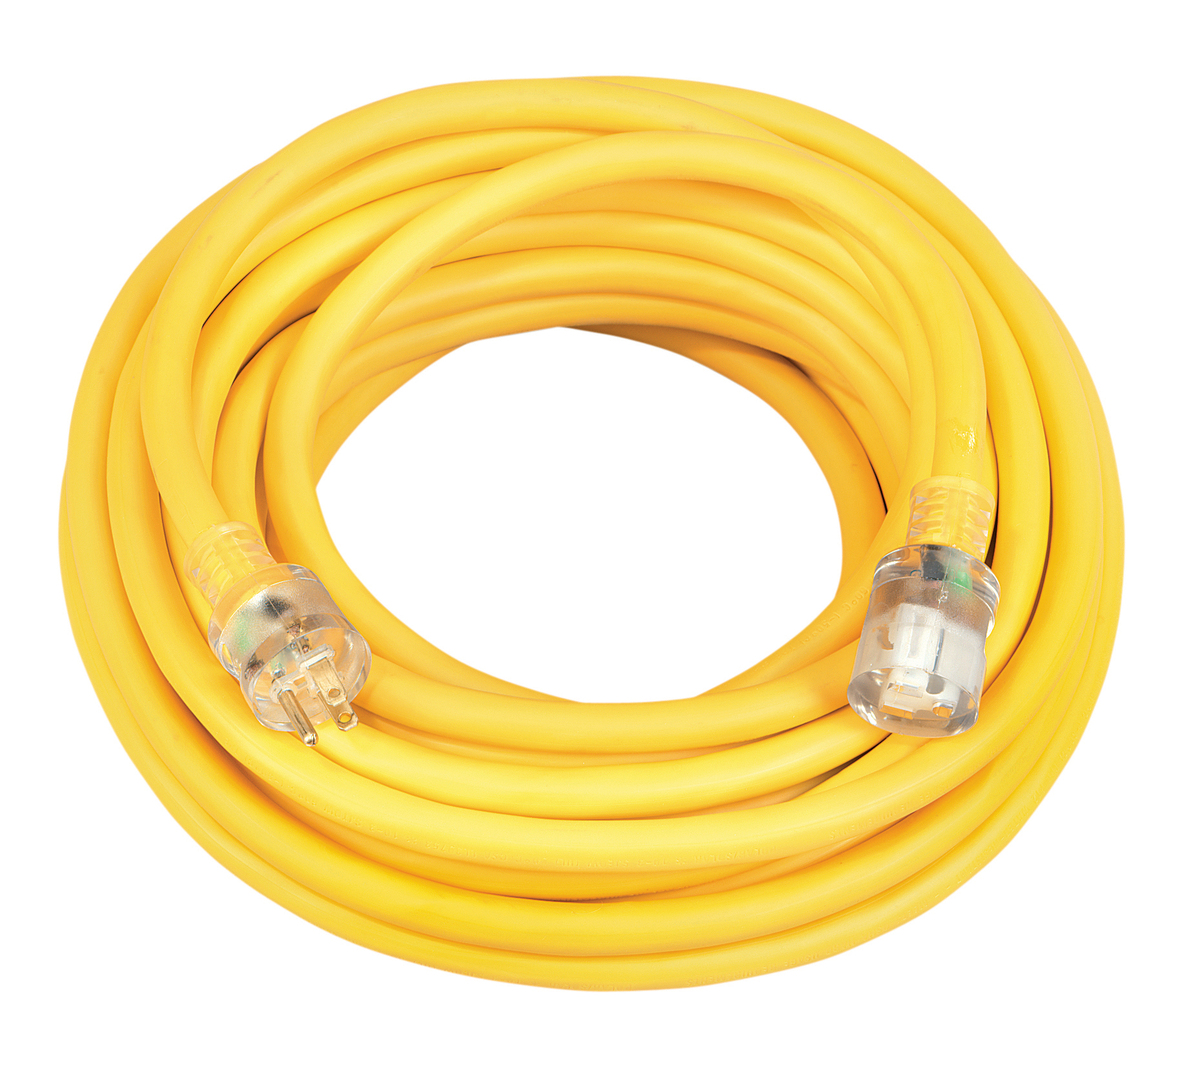 Details about   15-Foot 10 Gauge Extension Cord UL Lit End 3 Wire 10/3 Heavy Duty Ft Feet 